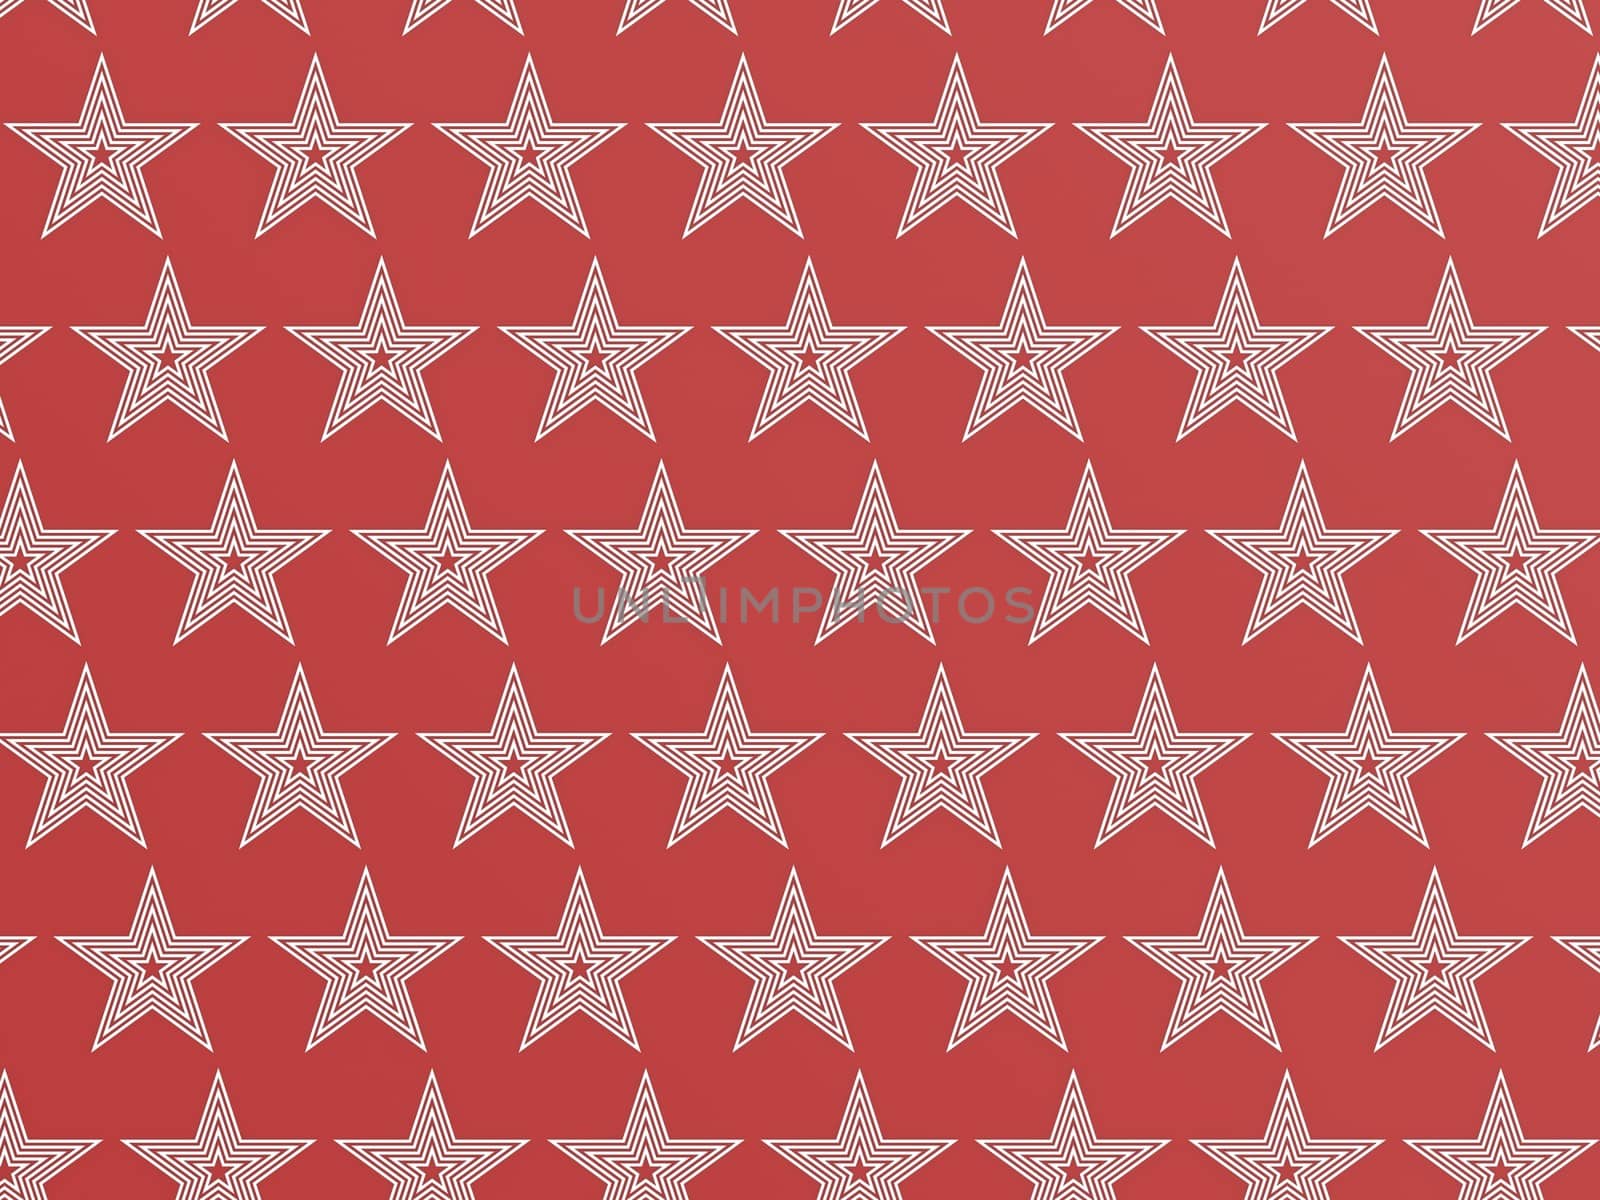 Red star pattern by tang90246